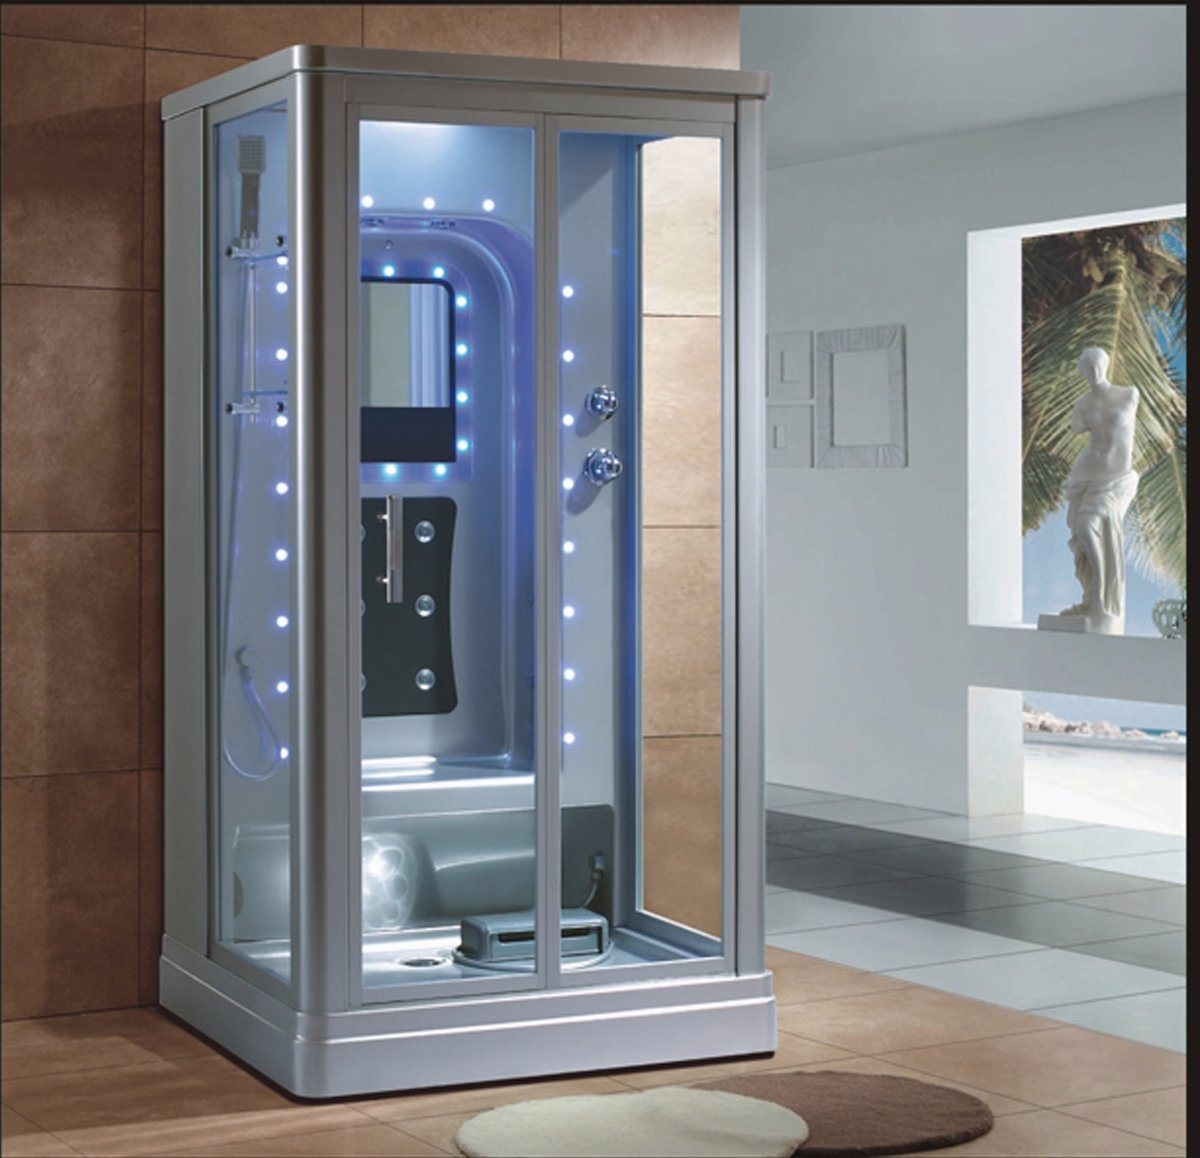 1000mm Rectangle Gray Steam Sauna with Shower for Single Persons (AT-0220-1)